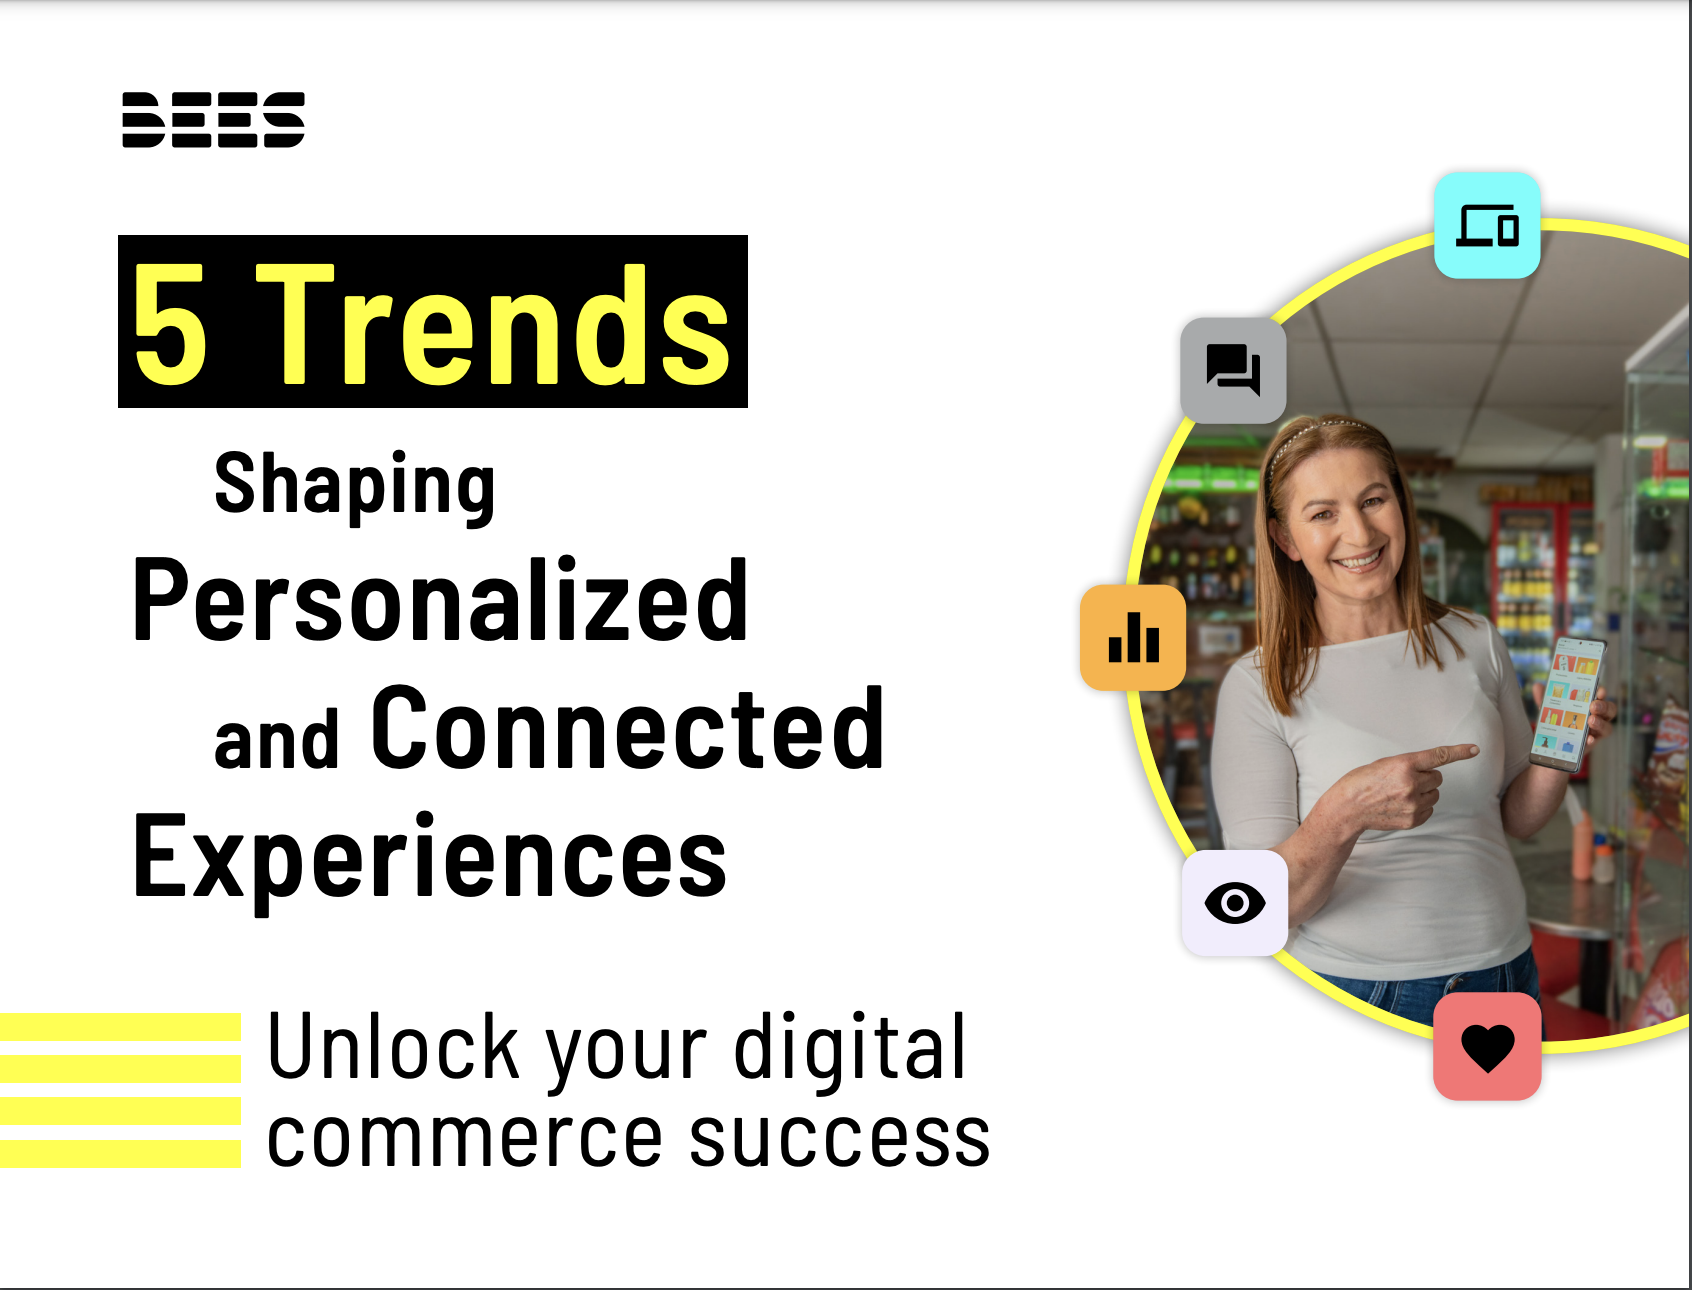 5 trends shaping personalized and connected experiences